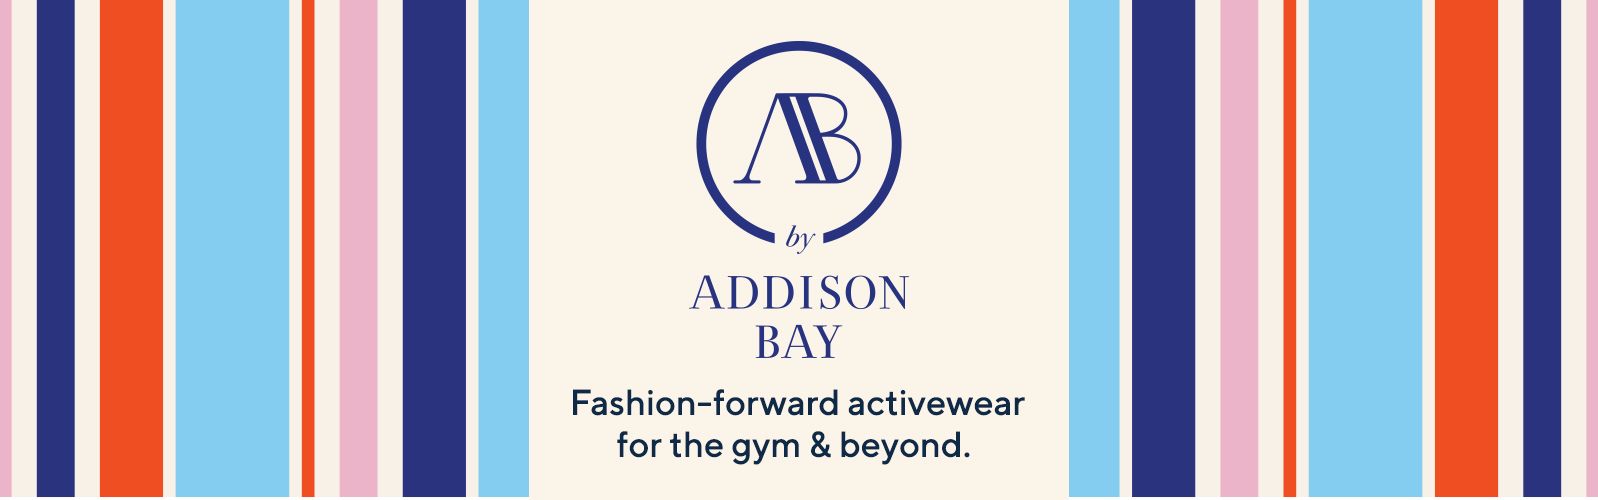 Addison Bay's New Line of Stylish and Comfy Activewear